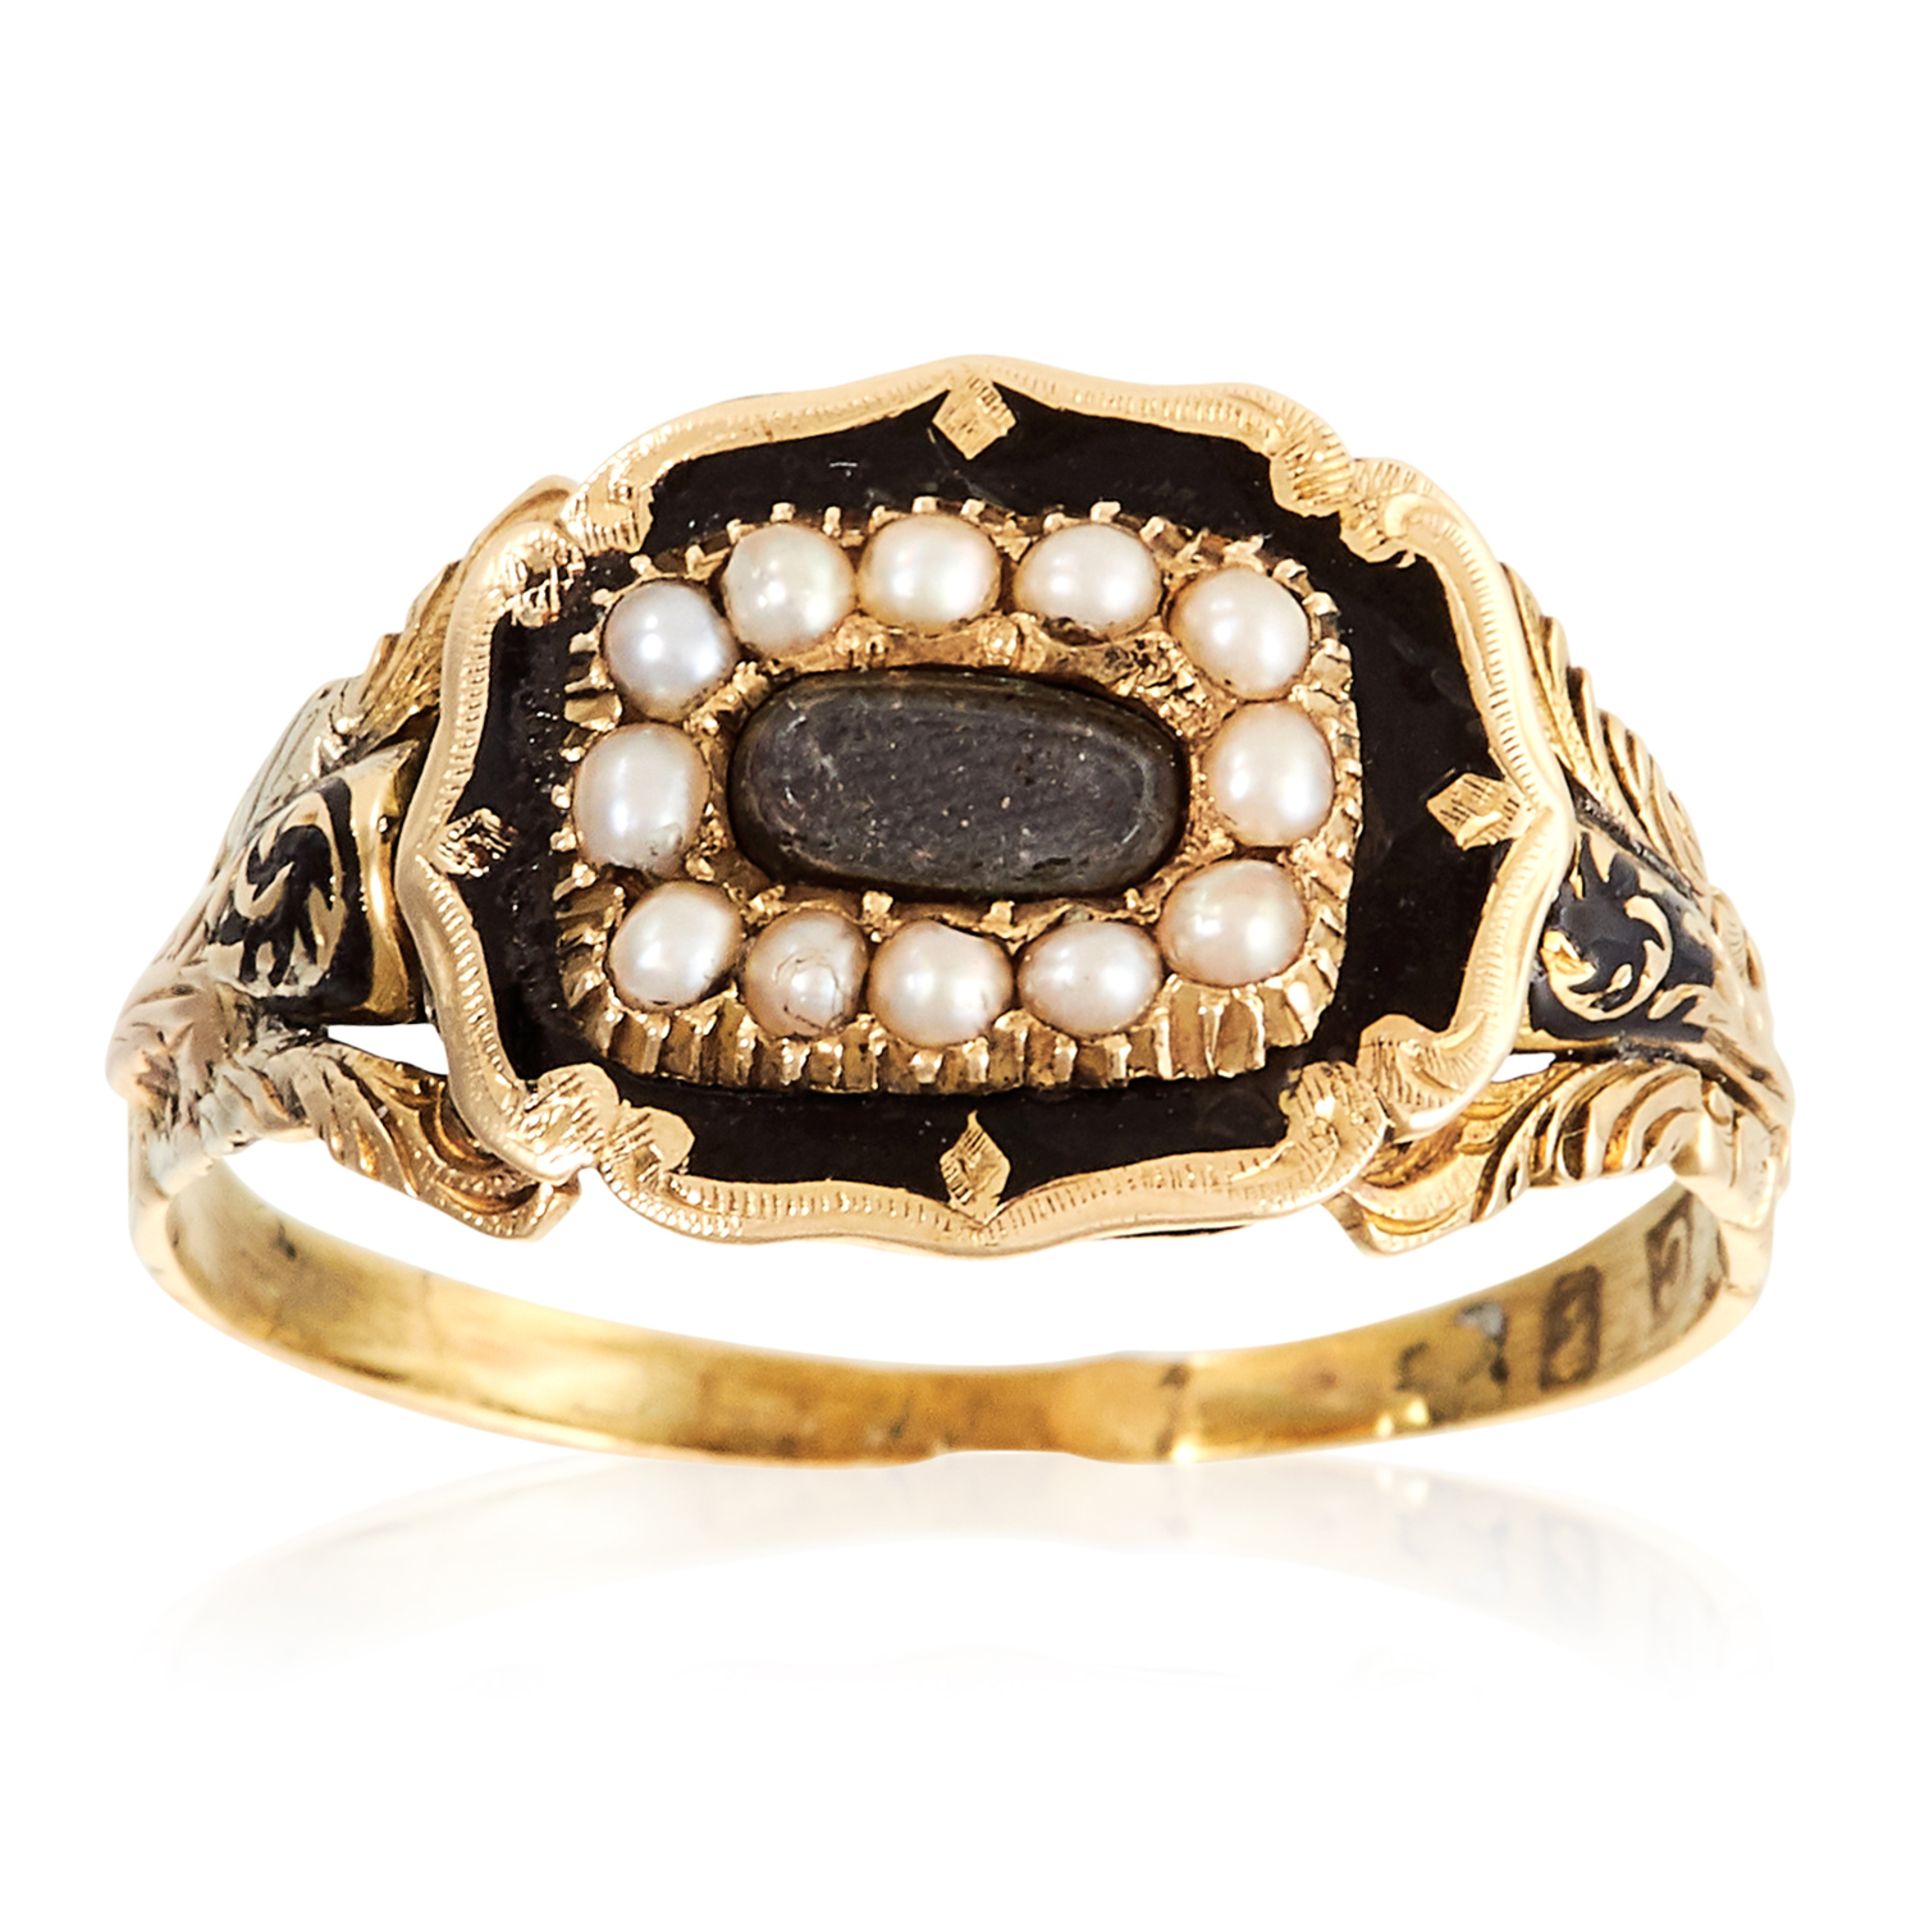 AN ANTIQUE HAIRWORK, PEARL AND ENAMEL MOURNING RING, CIRCA 1840 in high carat yellow gold, set